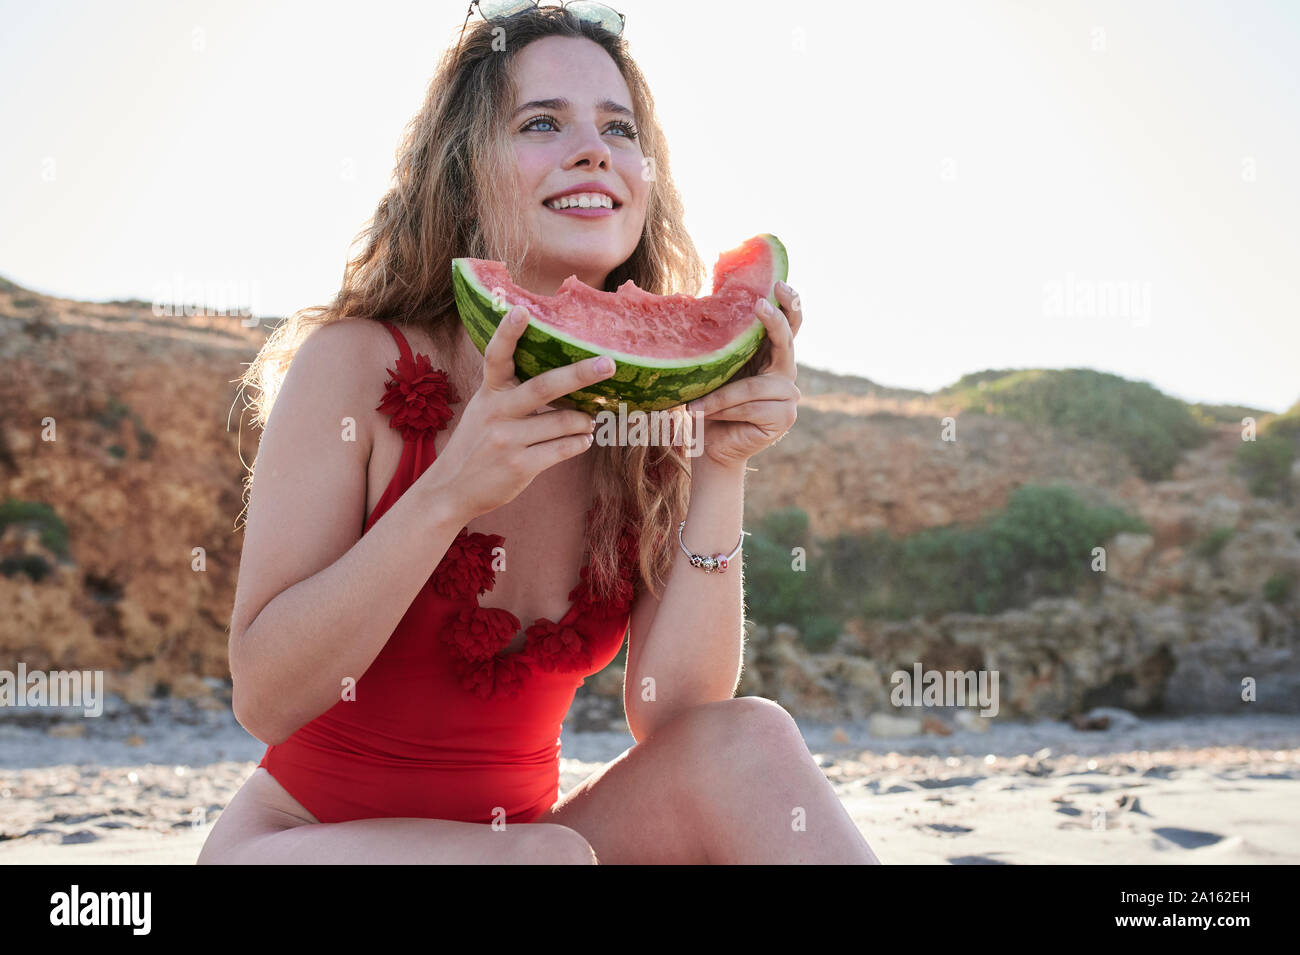 Happy young woman holding watermelon slice on the beach Stock Photo